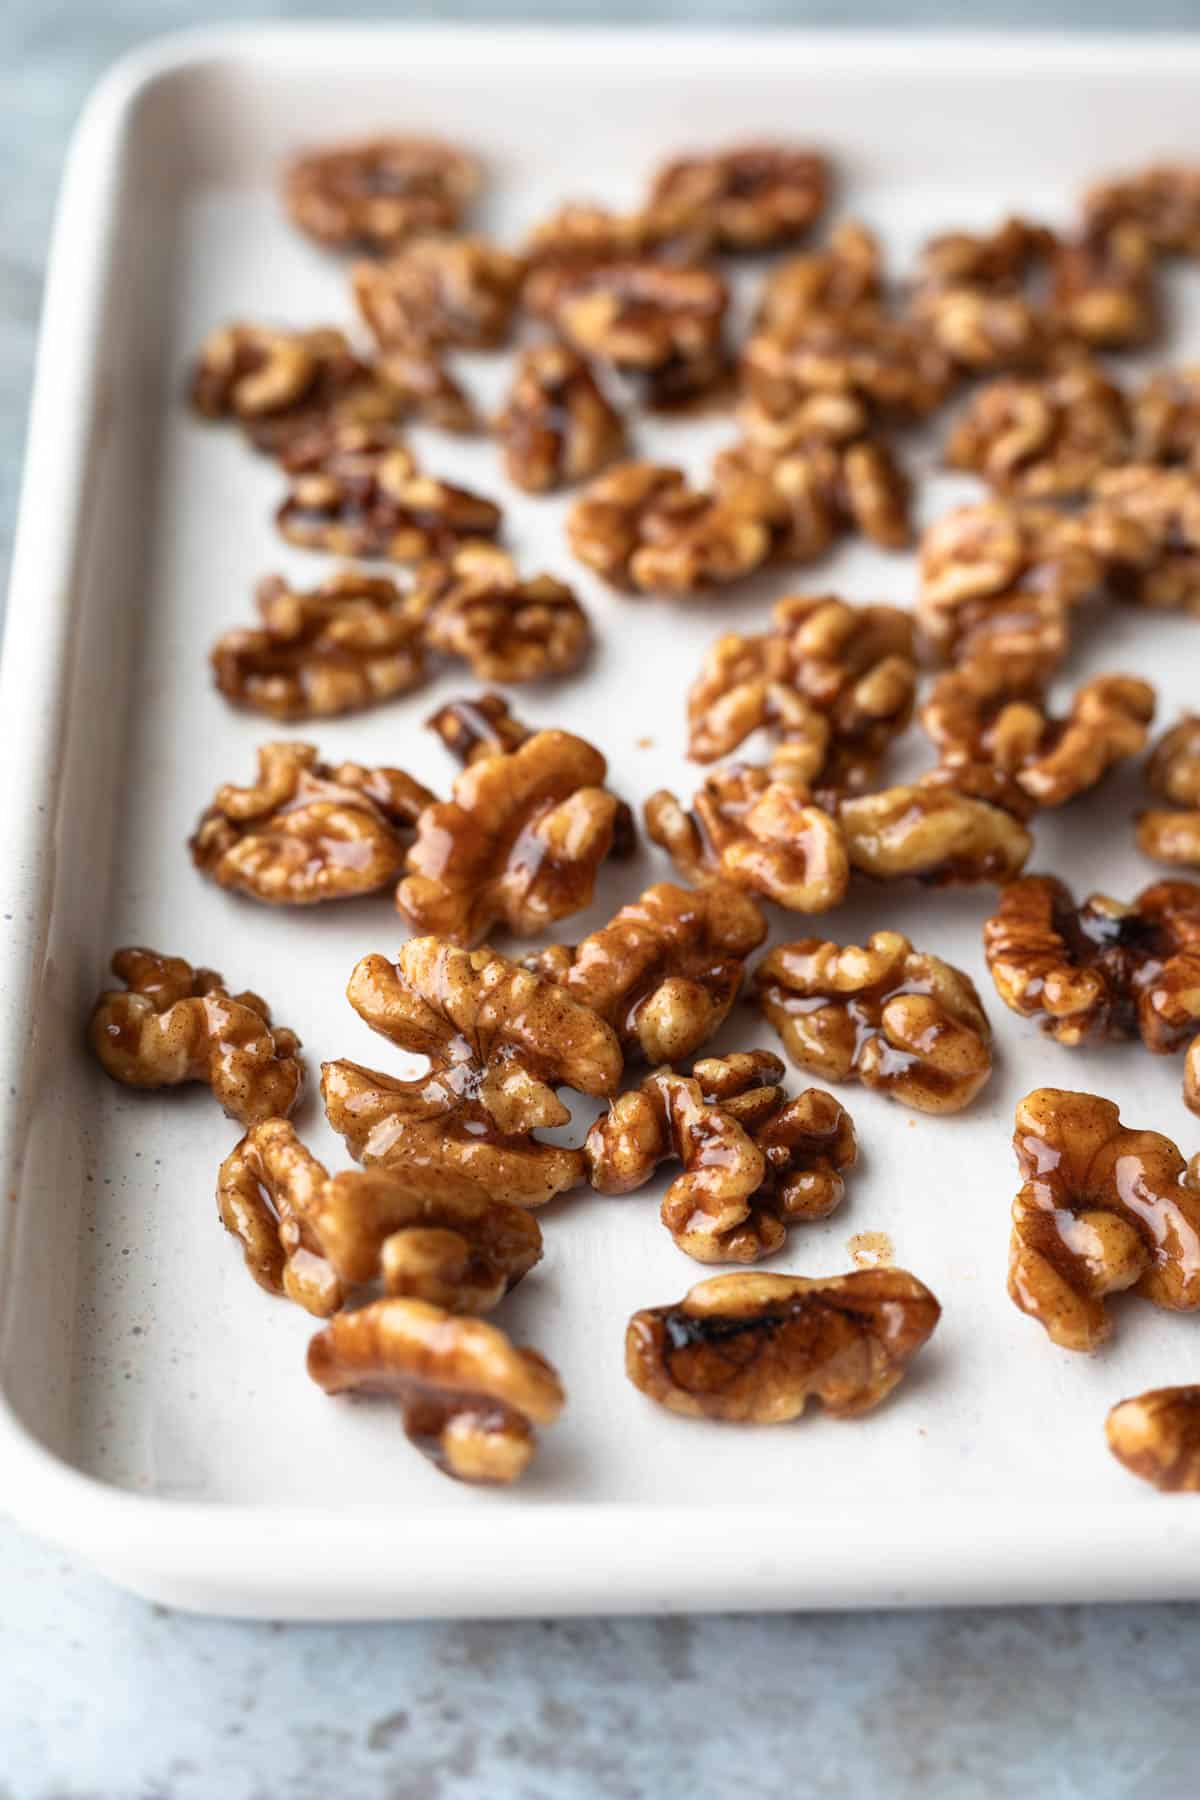 Maple candied walnuts cooling on a sheet pan.